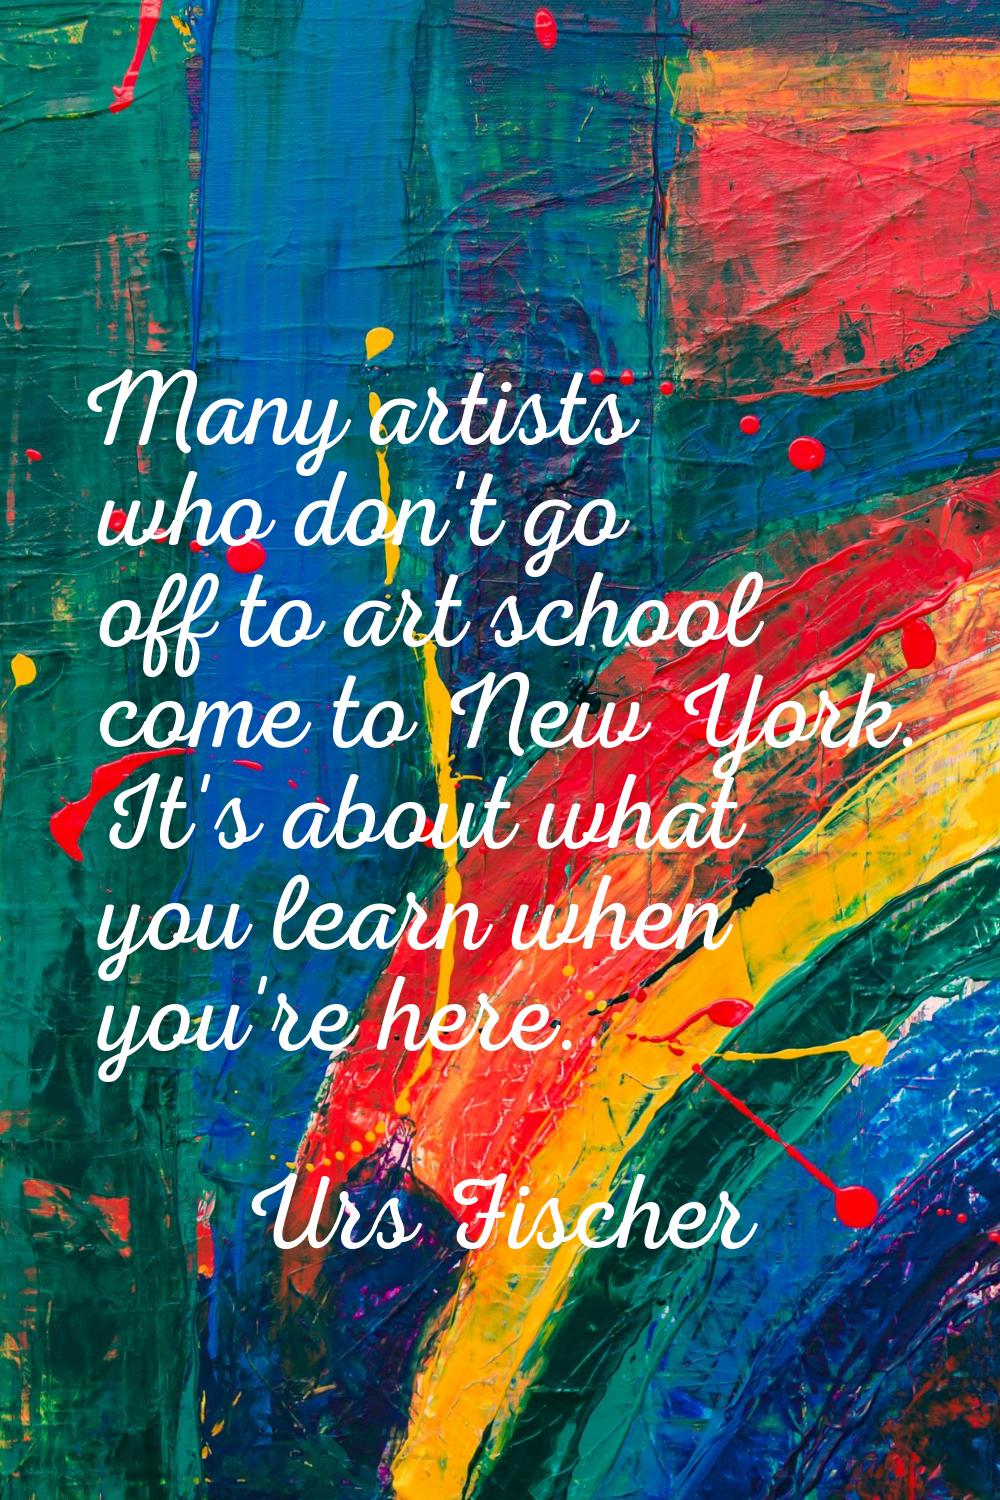 Many artists who don't go off to art school come to New York. It's about what you learn when you're